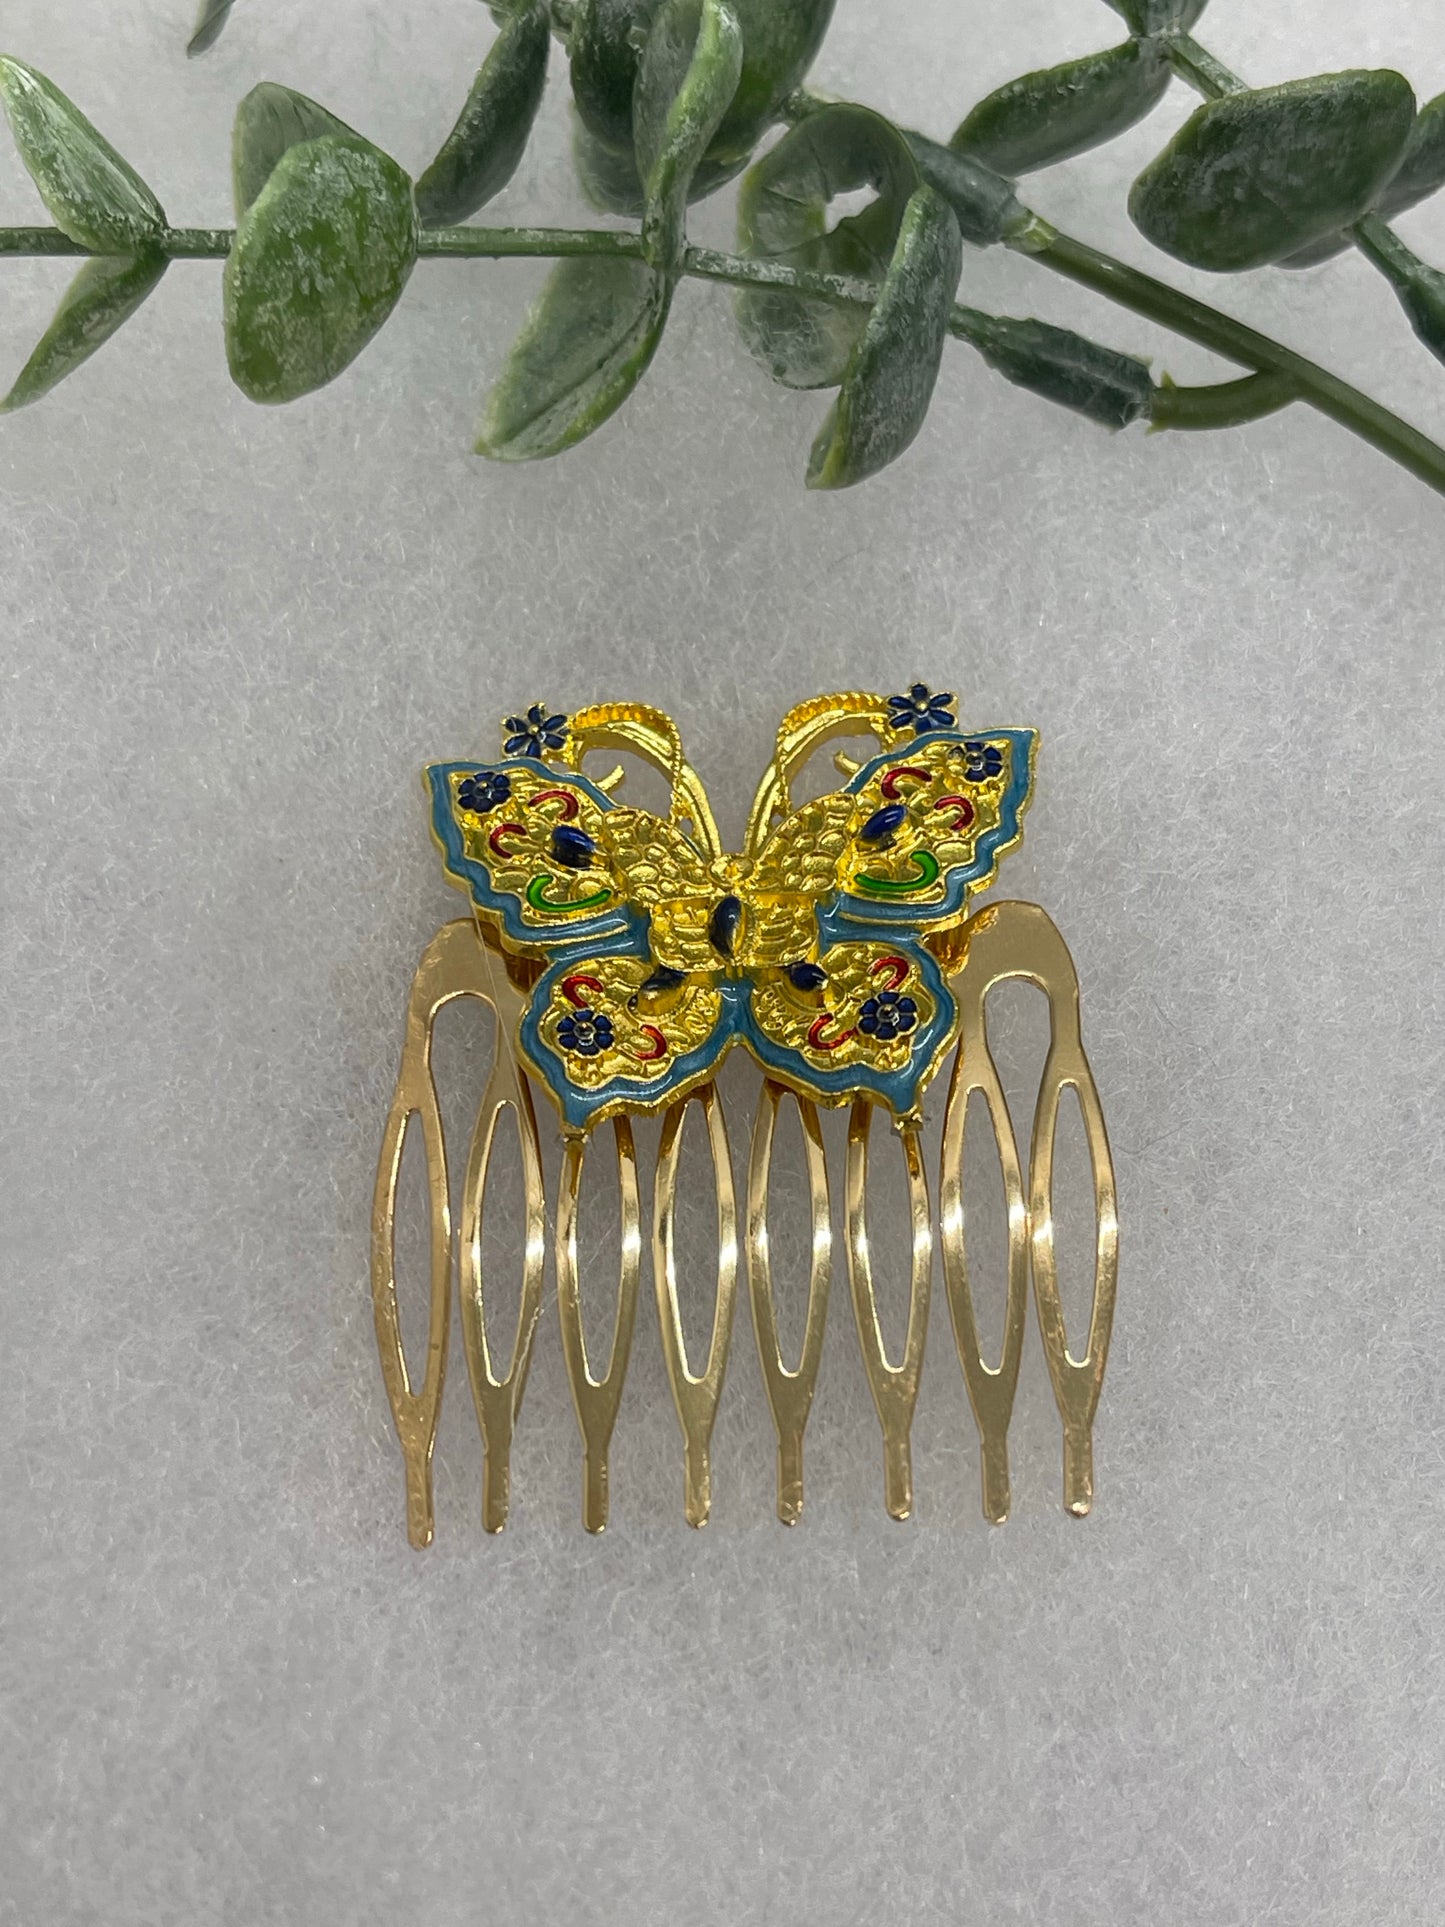 Gold Blue butterfly 2.0” gold tone bridal side Comb accents handmade by hairdazzzel wedding accessory bride princess gifts Shower hair accessory